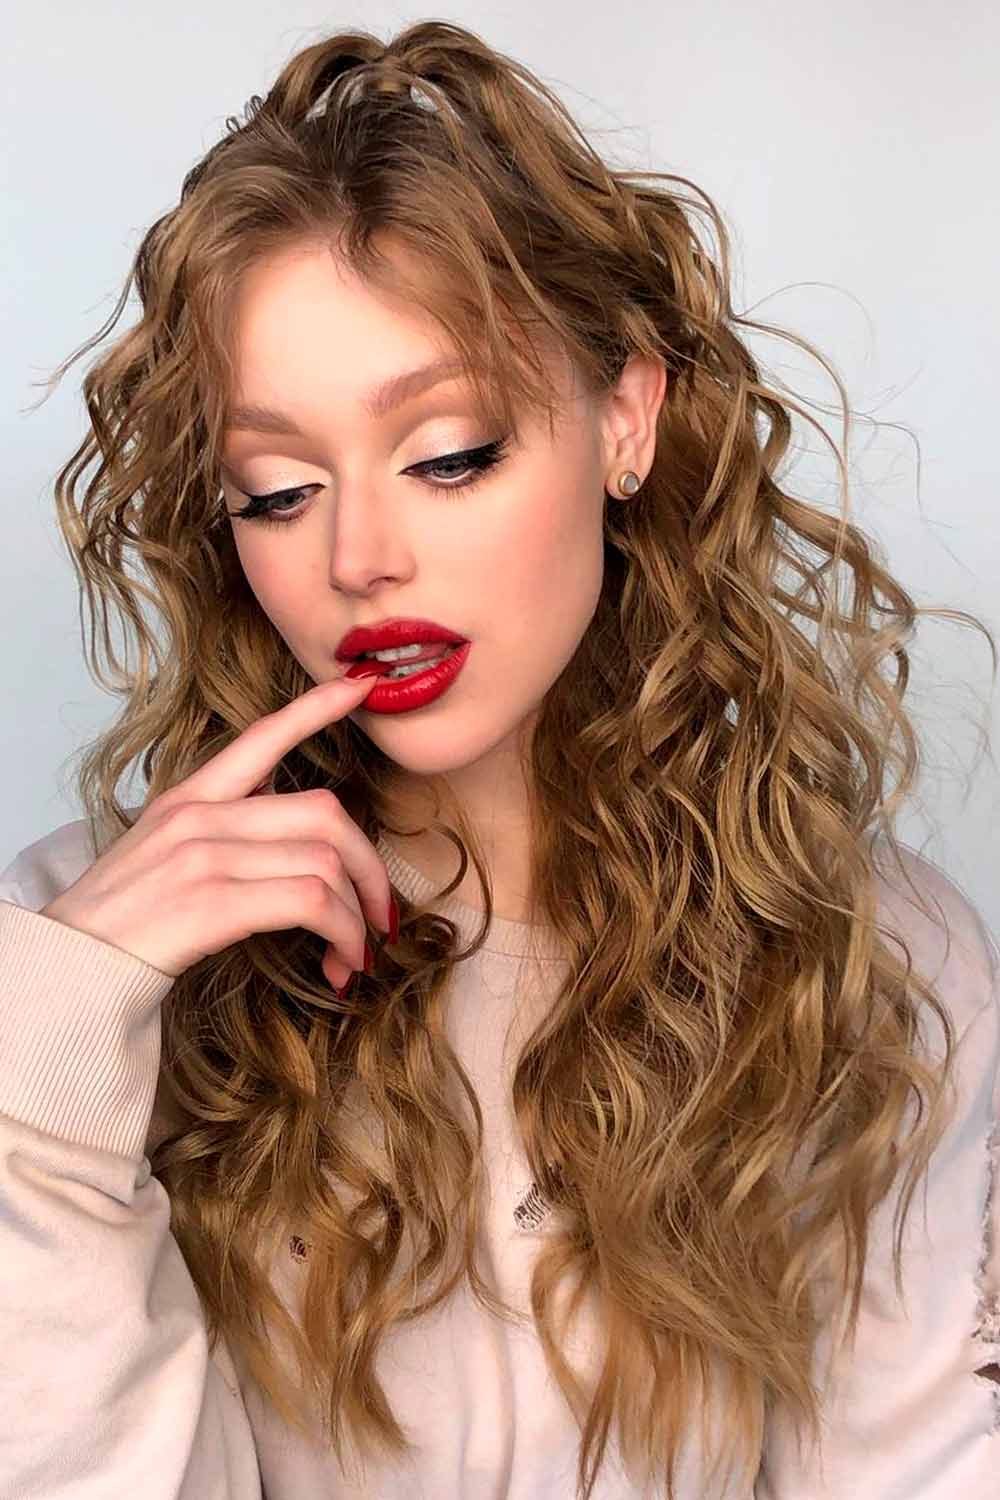 Trendy Half-Updos For Curly Hair